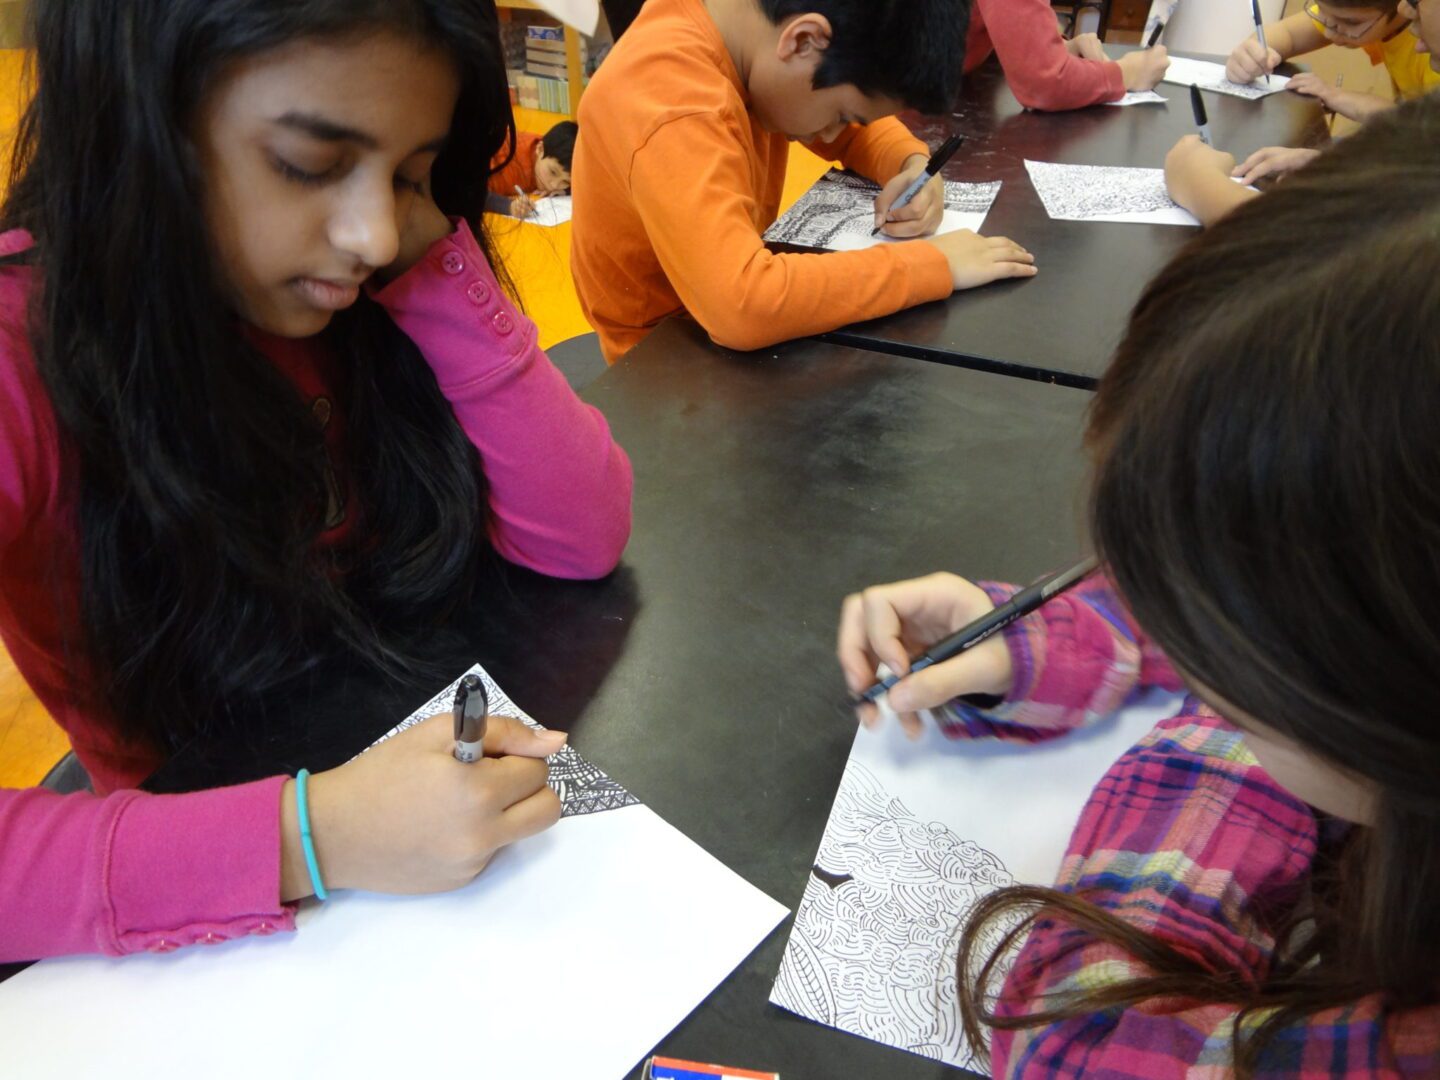 A group of kids drawing on paper in a classroom.